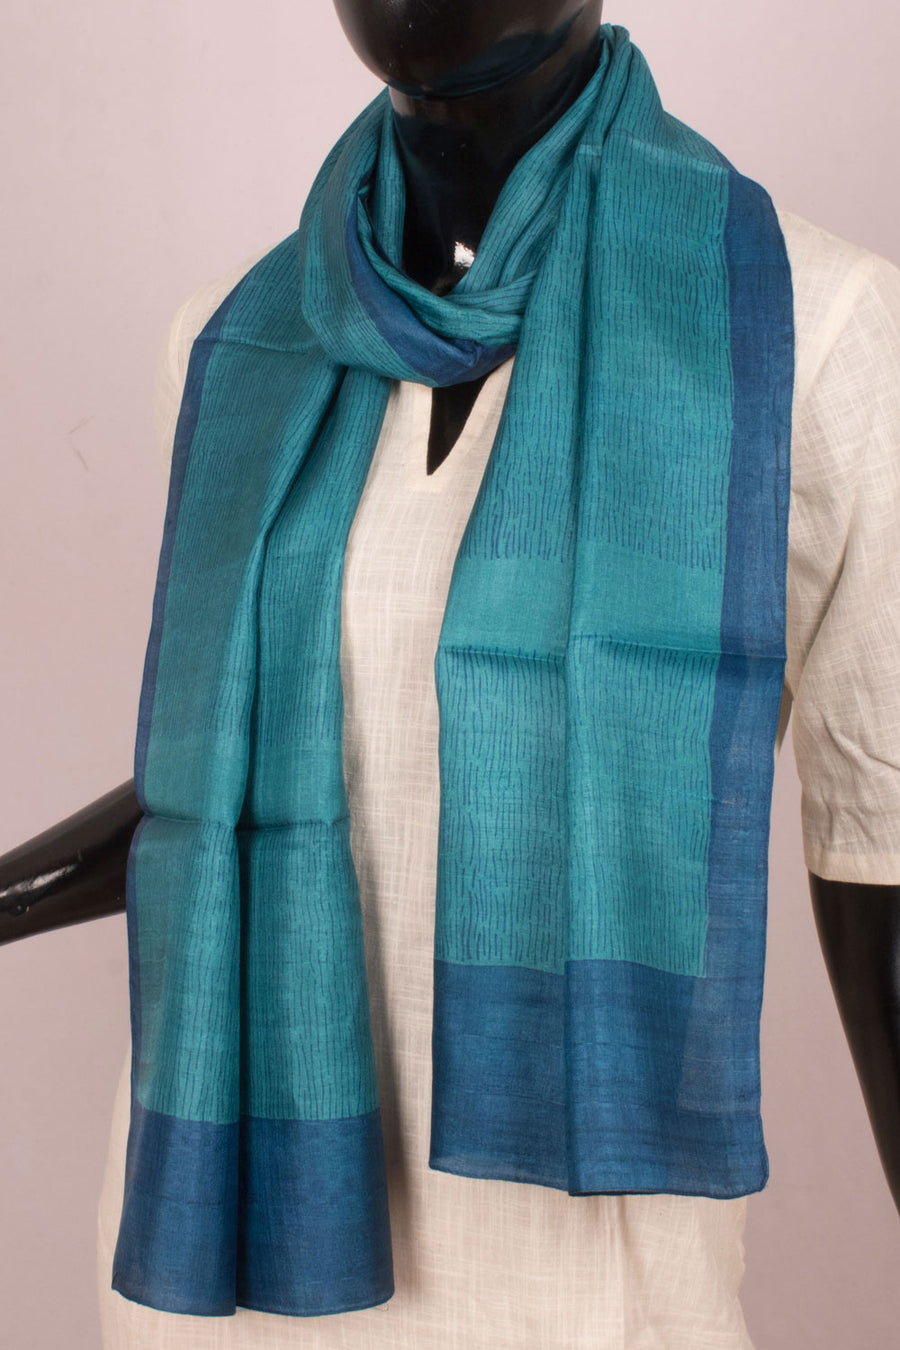 Hand Block Printed Tussar Silk Stole with Stripes Design